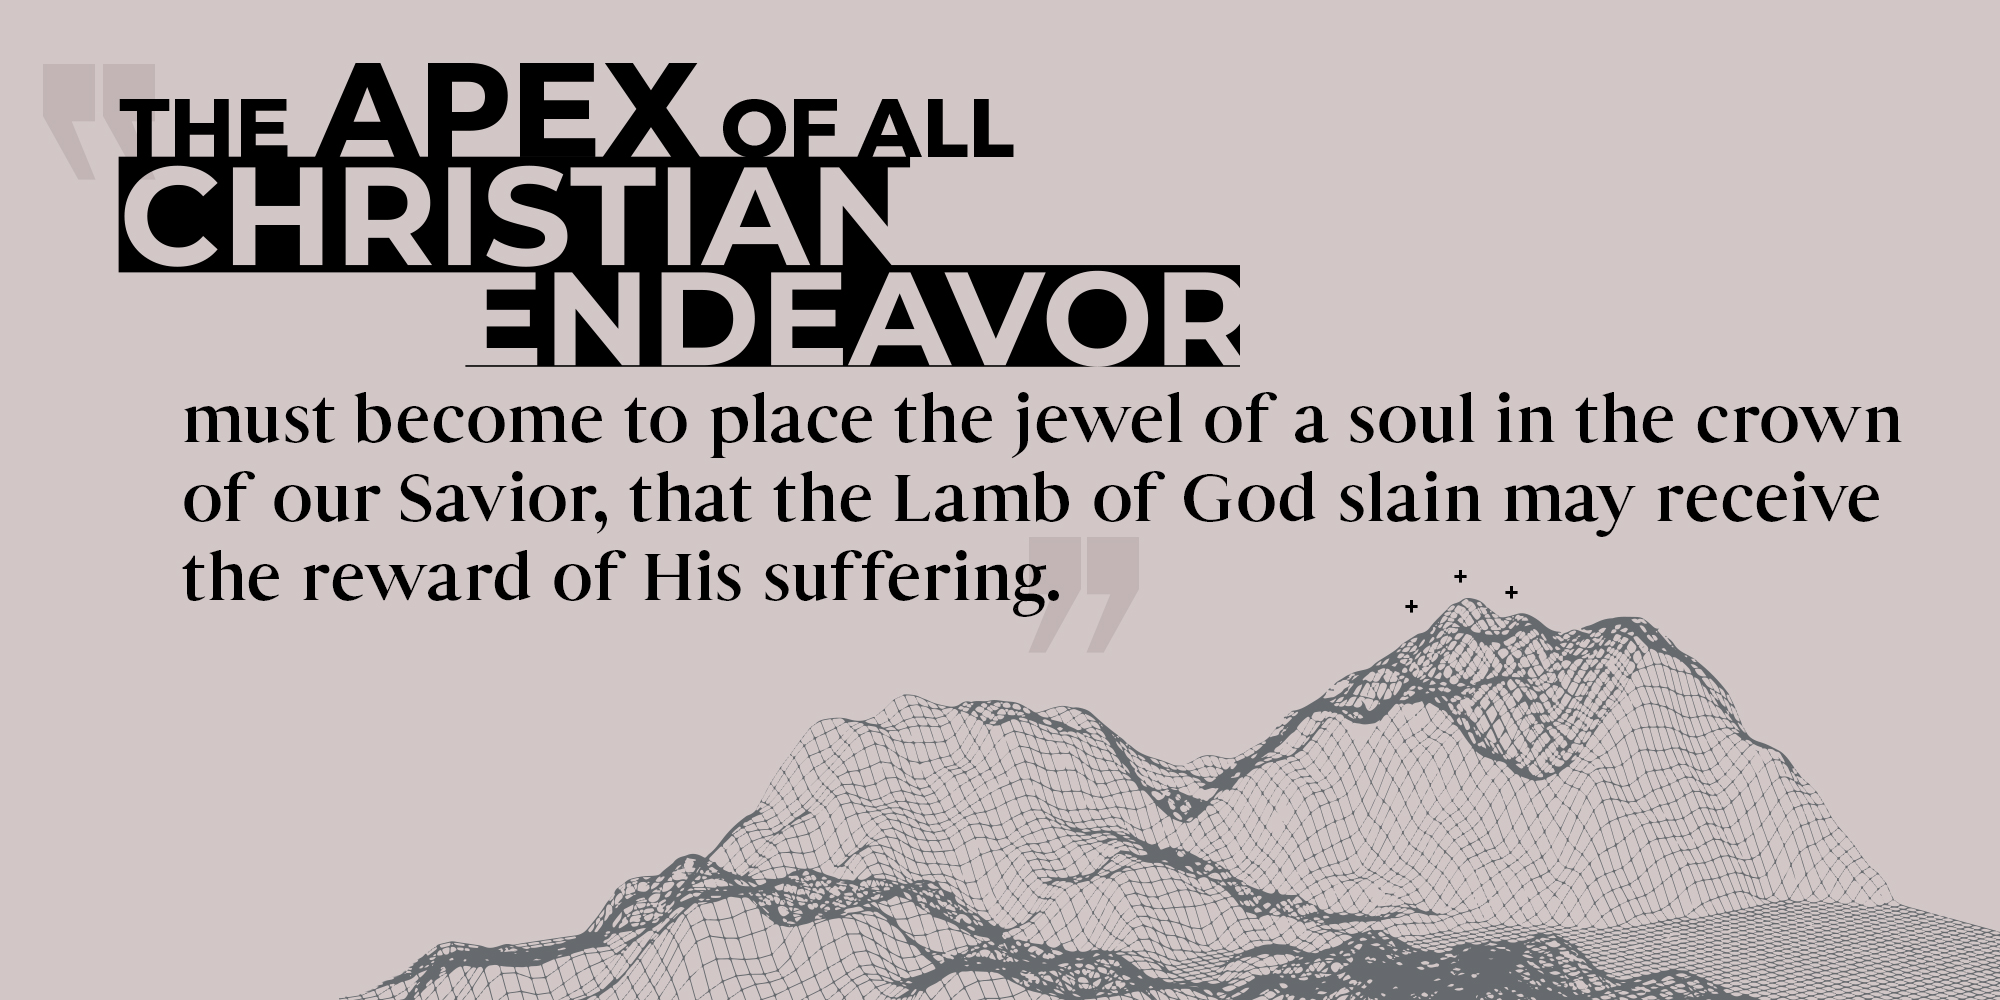 The Apex of All Christian Endeavor Must Become to Place the Jewel of a Soul in the Crown of Our Savior That the Lamb of God Slain May Receive the Reward of His Suffering.